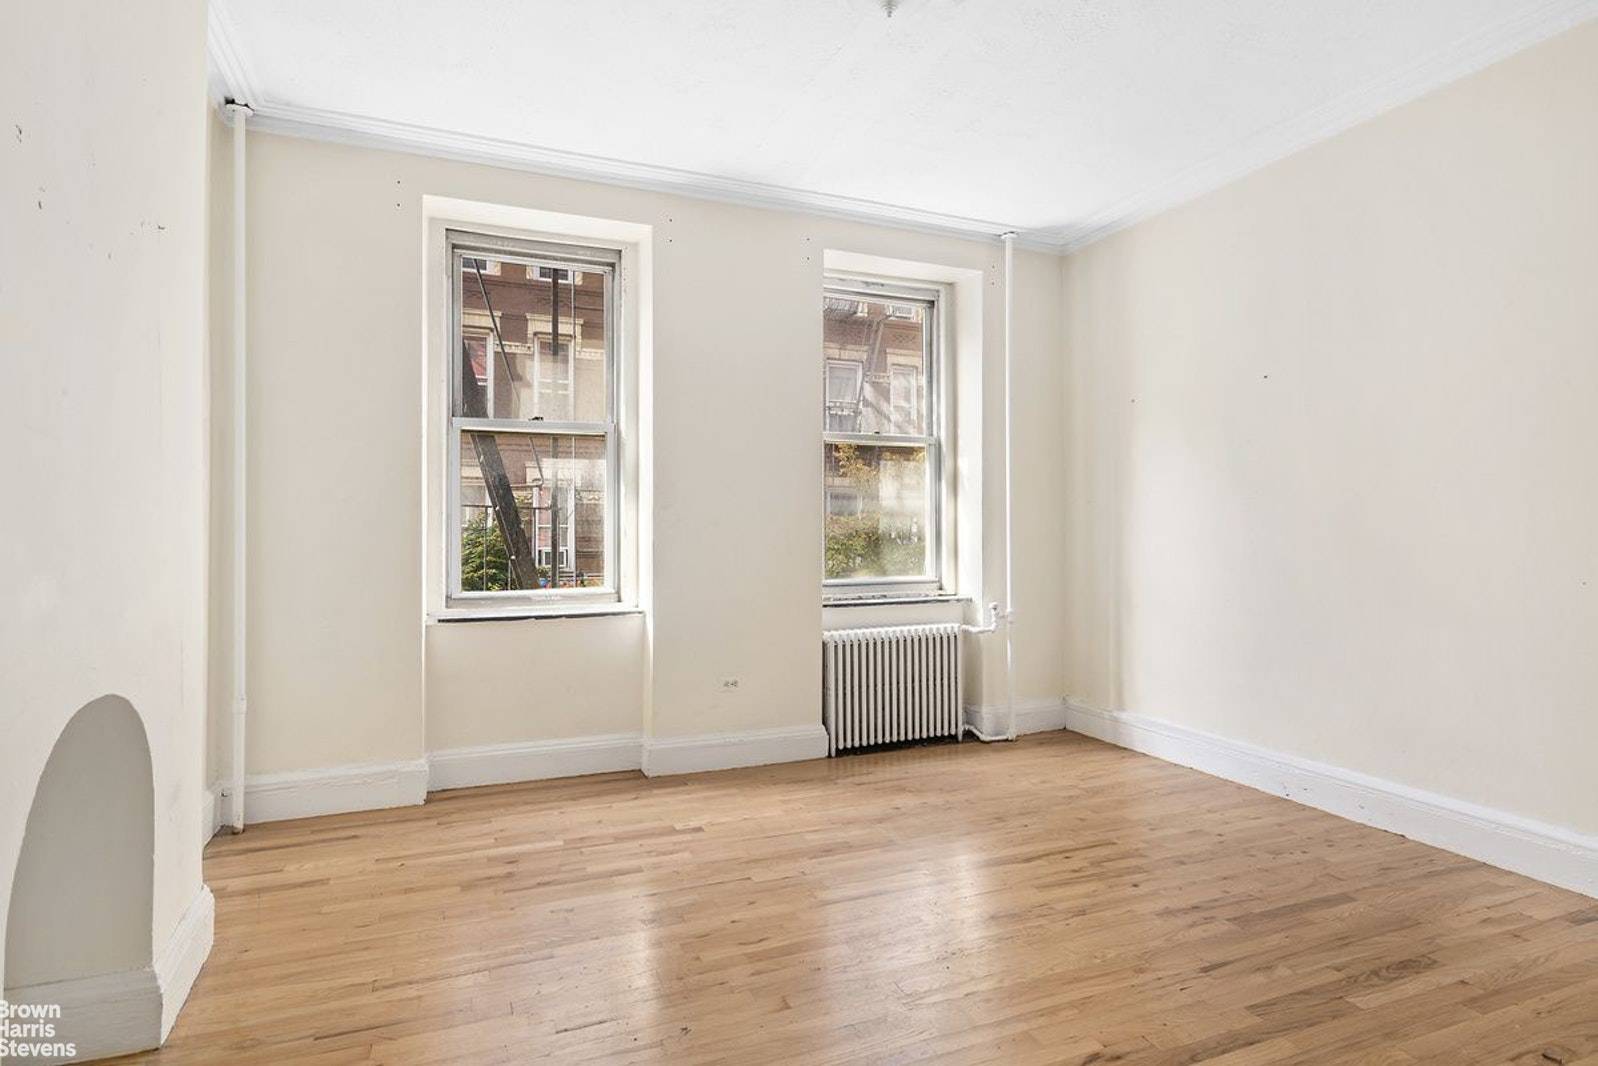 ENTIRE FLOOR THROUGH amp ; ABSOLUTELY MASSIVE 1BR or 2BR convertible apartment with home office ENORMOUS APARTMENT WINDOWS IN EVERY ROOM Bright and Sunny REFURBISHED HARDWOOD floors throughout CHARMING PRE ...